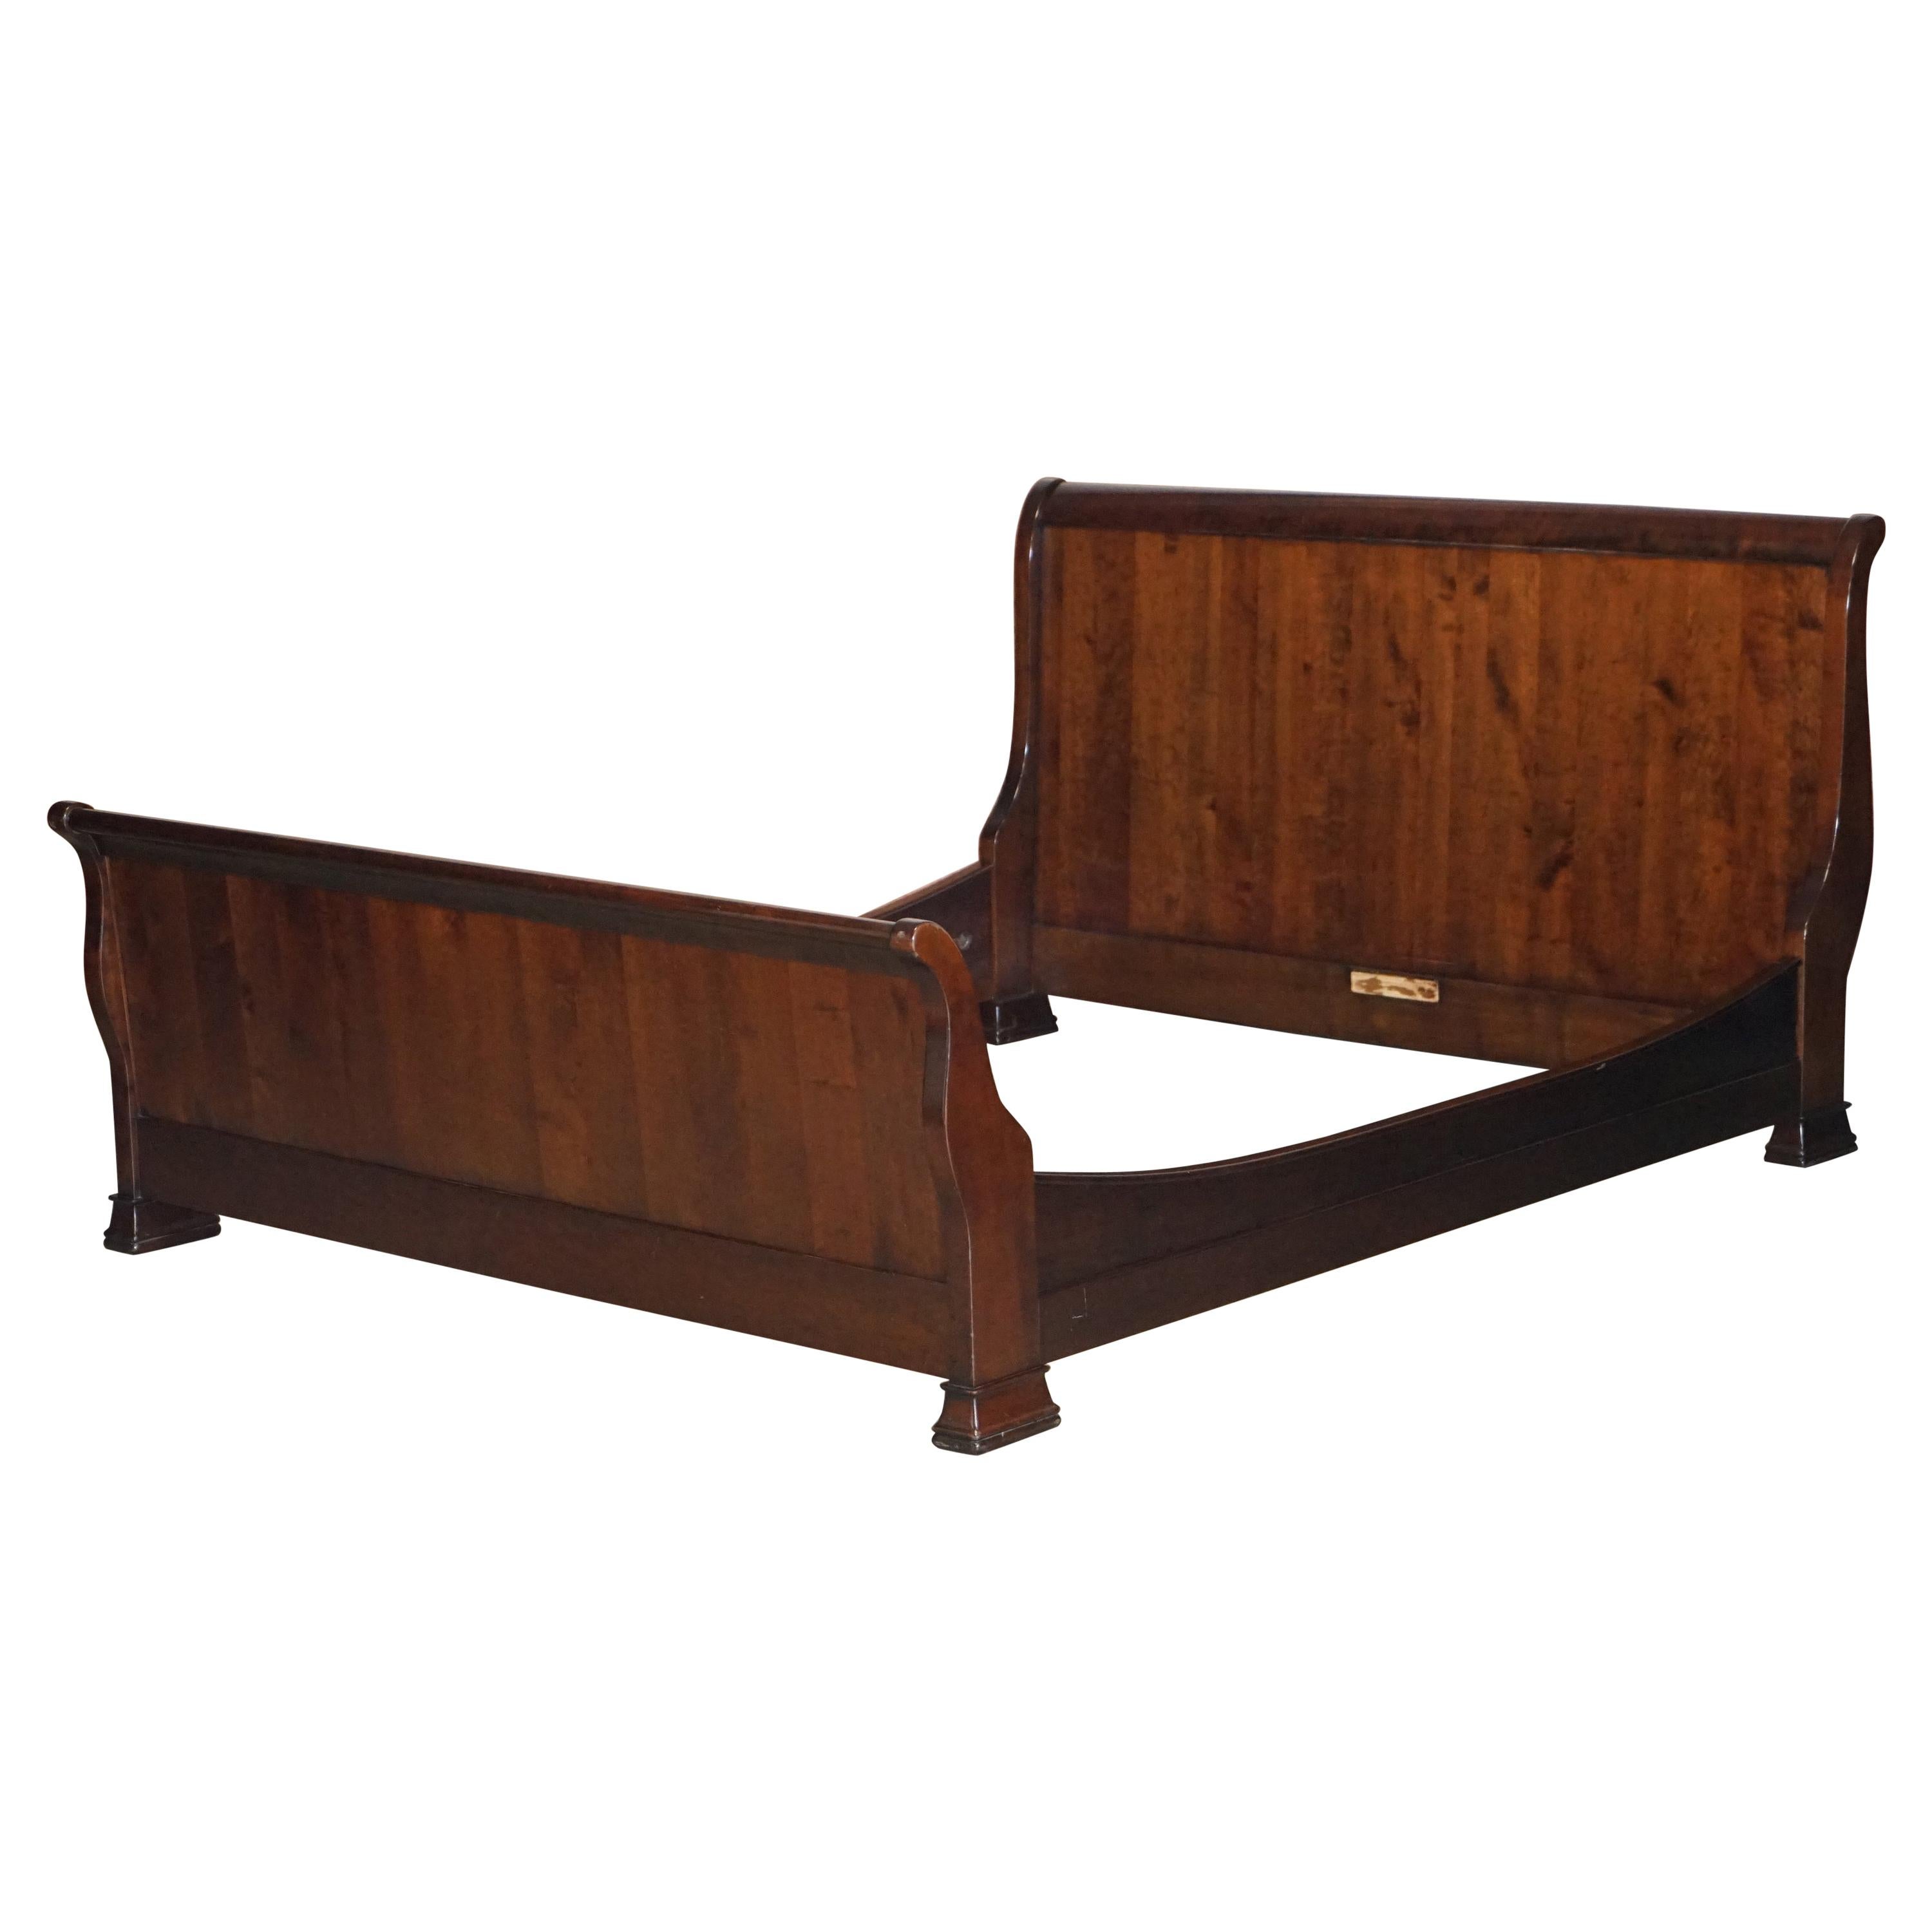 Sleigh Bed Frame Exquisite Timber, King Size Bed Frame Sleigh Bed